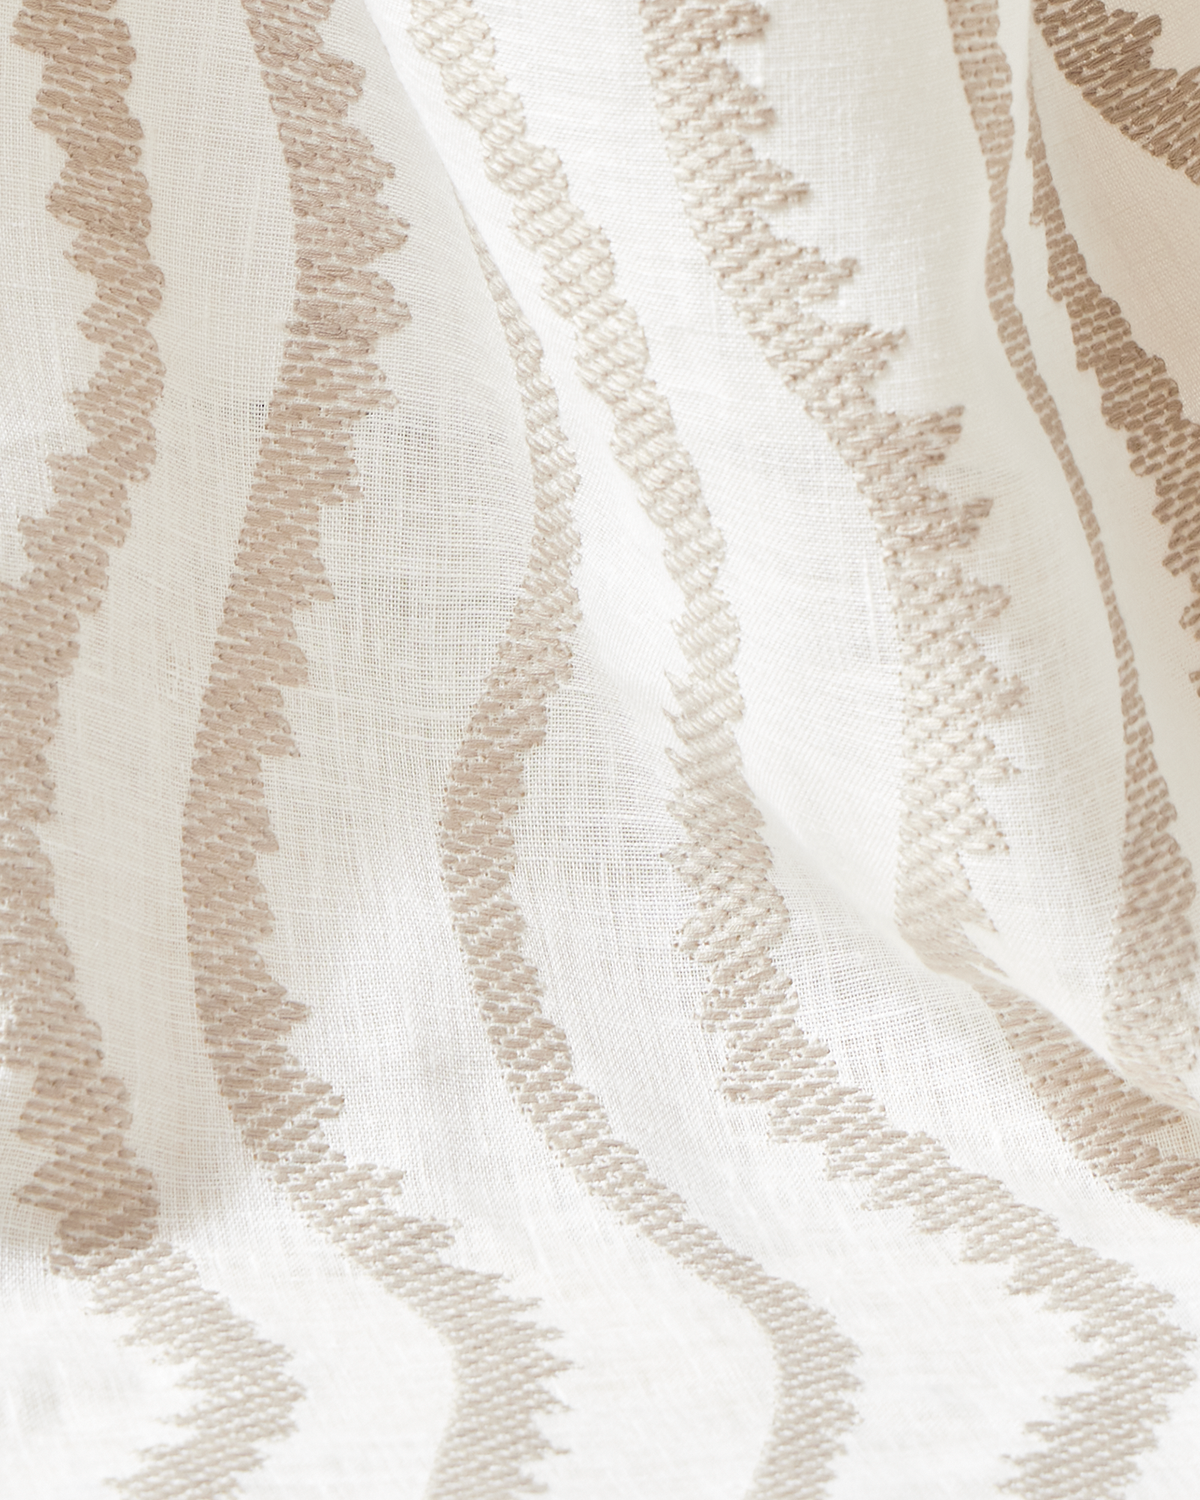 Notched Vines Fabric in Ivory/Gray